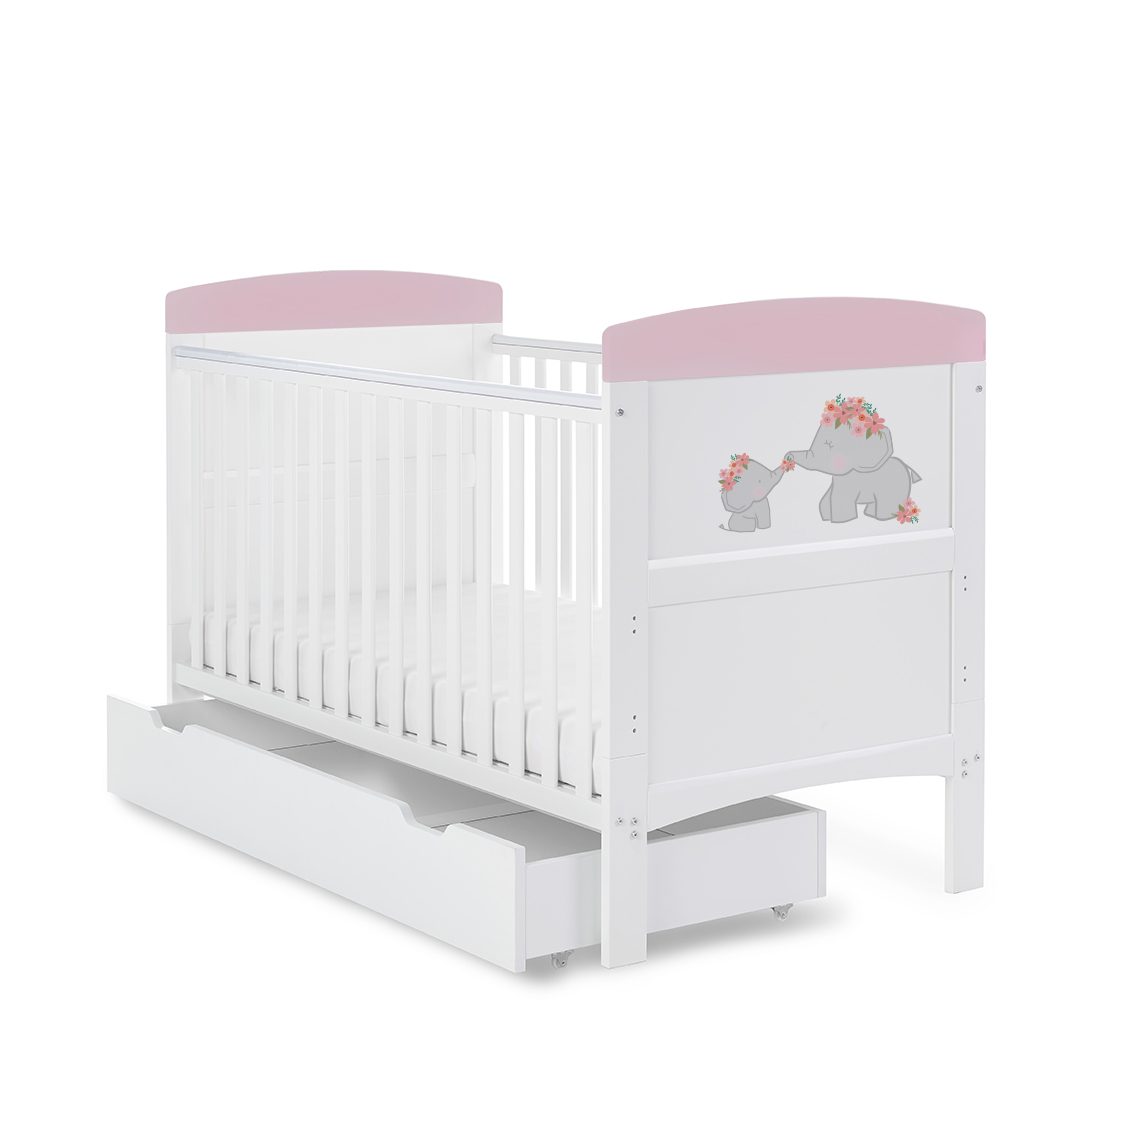 Obaby Grace Inspire Cot Bed & Underdrawer – Me & Mini Me Elephants – Pink -  | For Your Little One